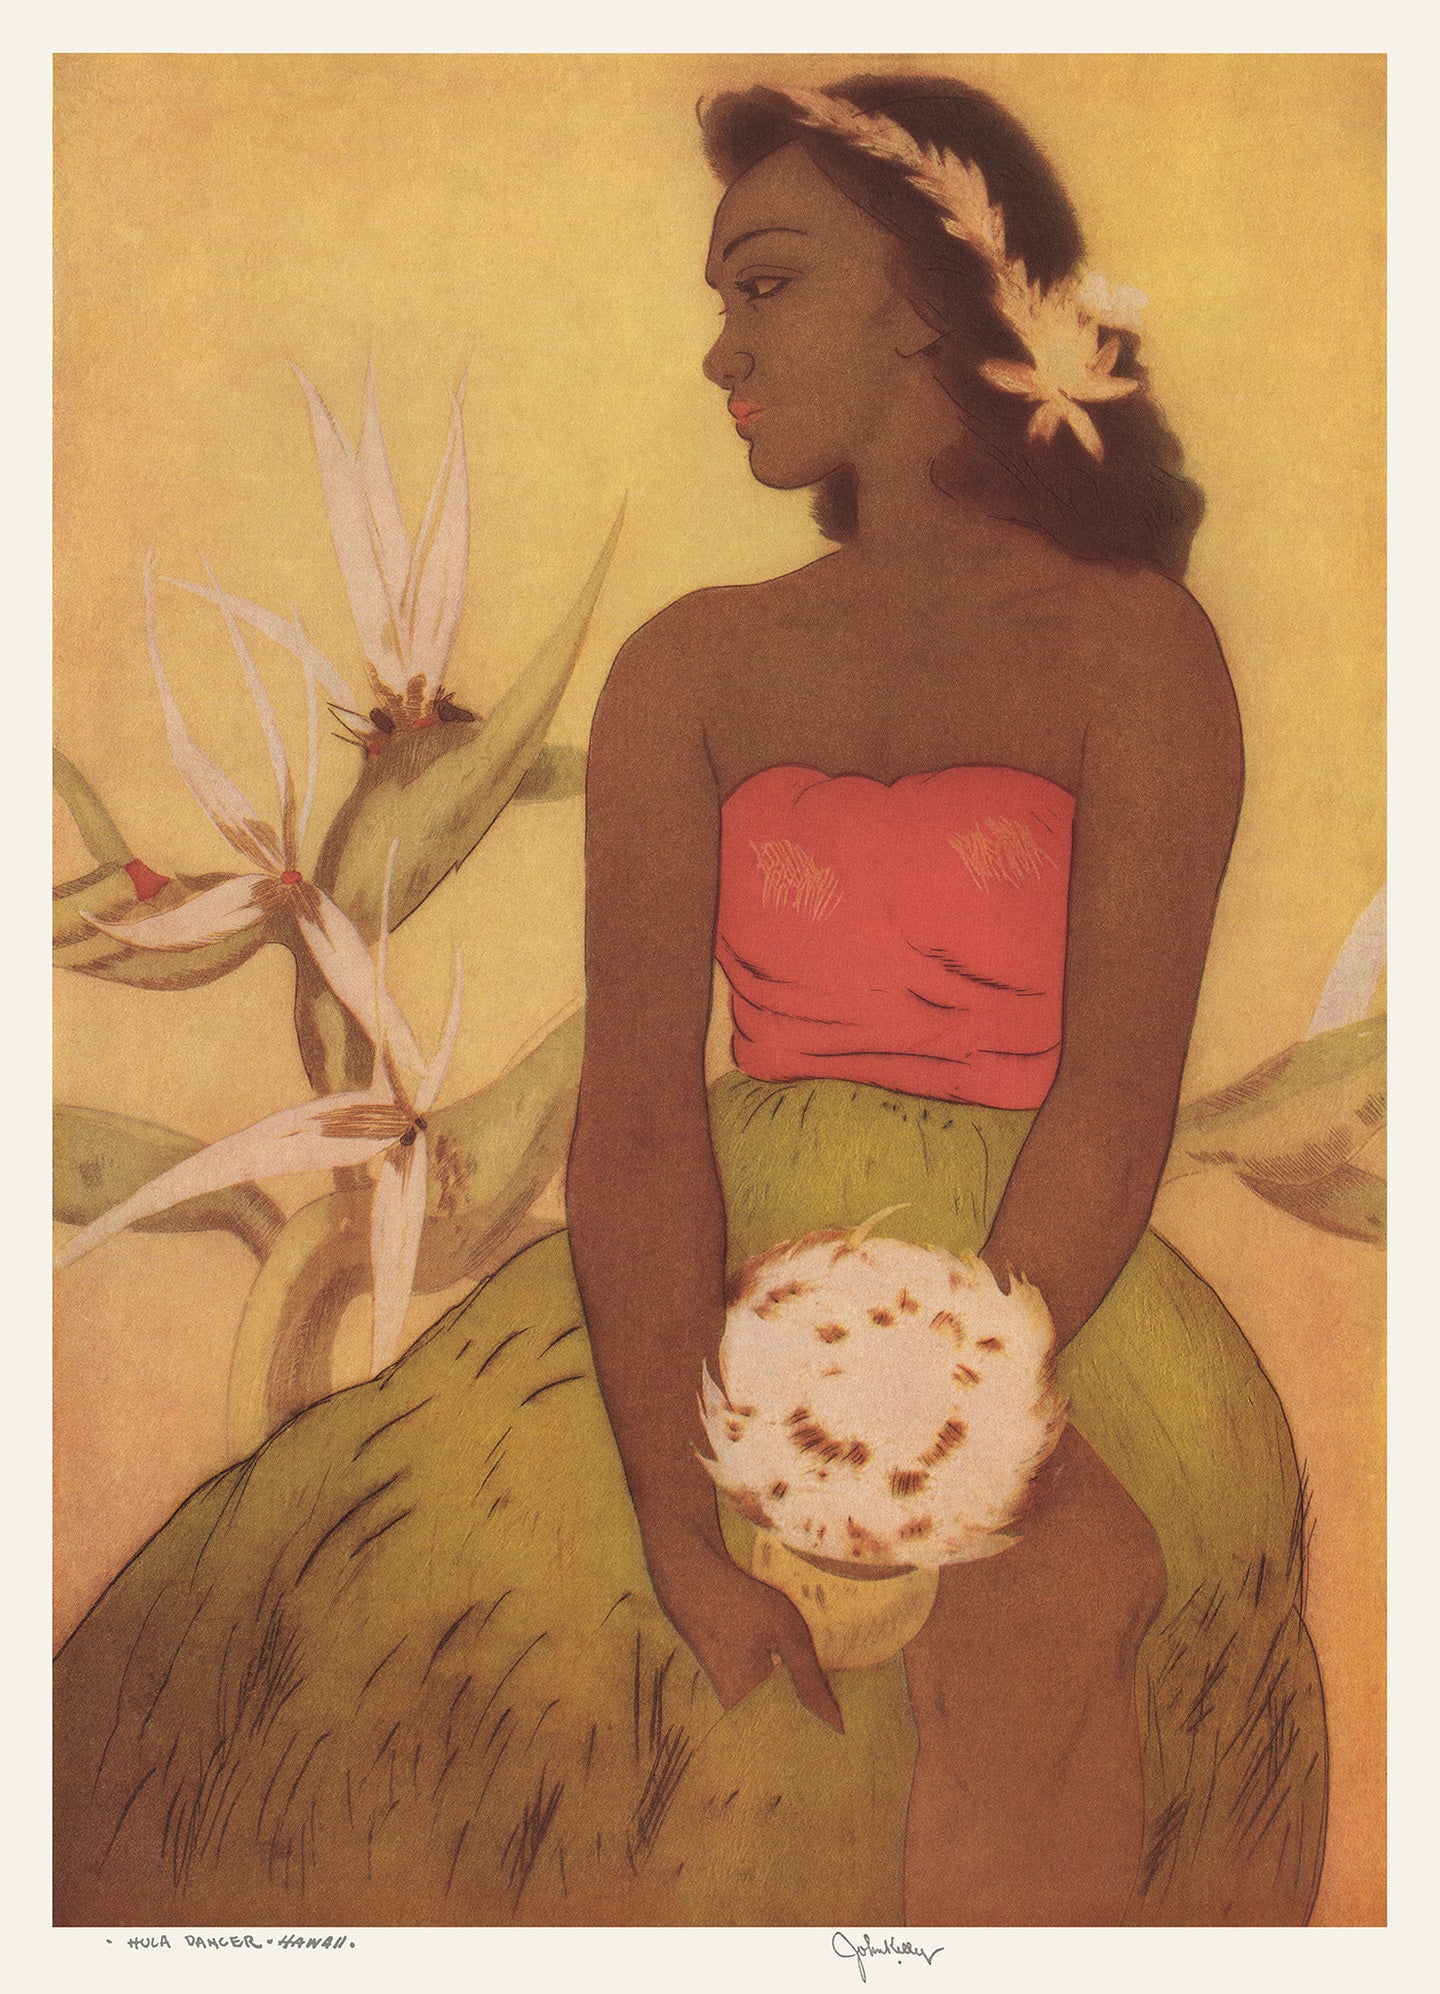 Hawaiian hula dancer sitting next to a bird of paradise plant wearing a green skirt and red strapless top and holding a feather gourd. Artist John Kelly.